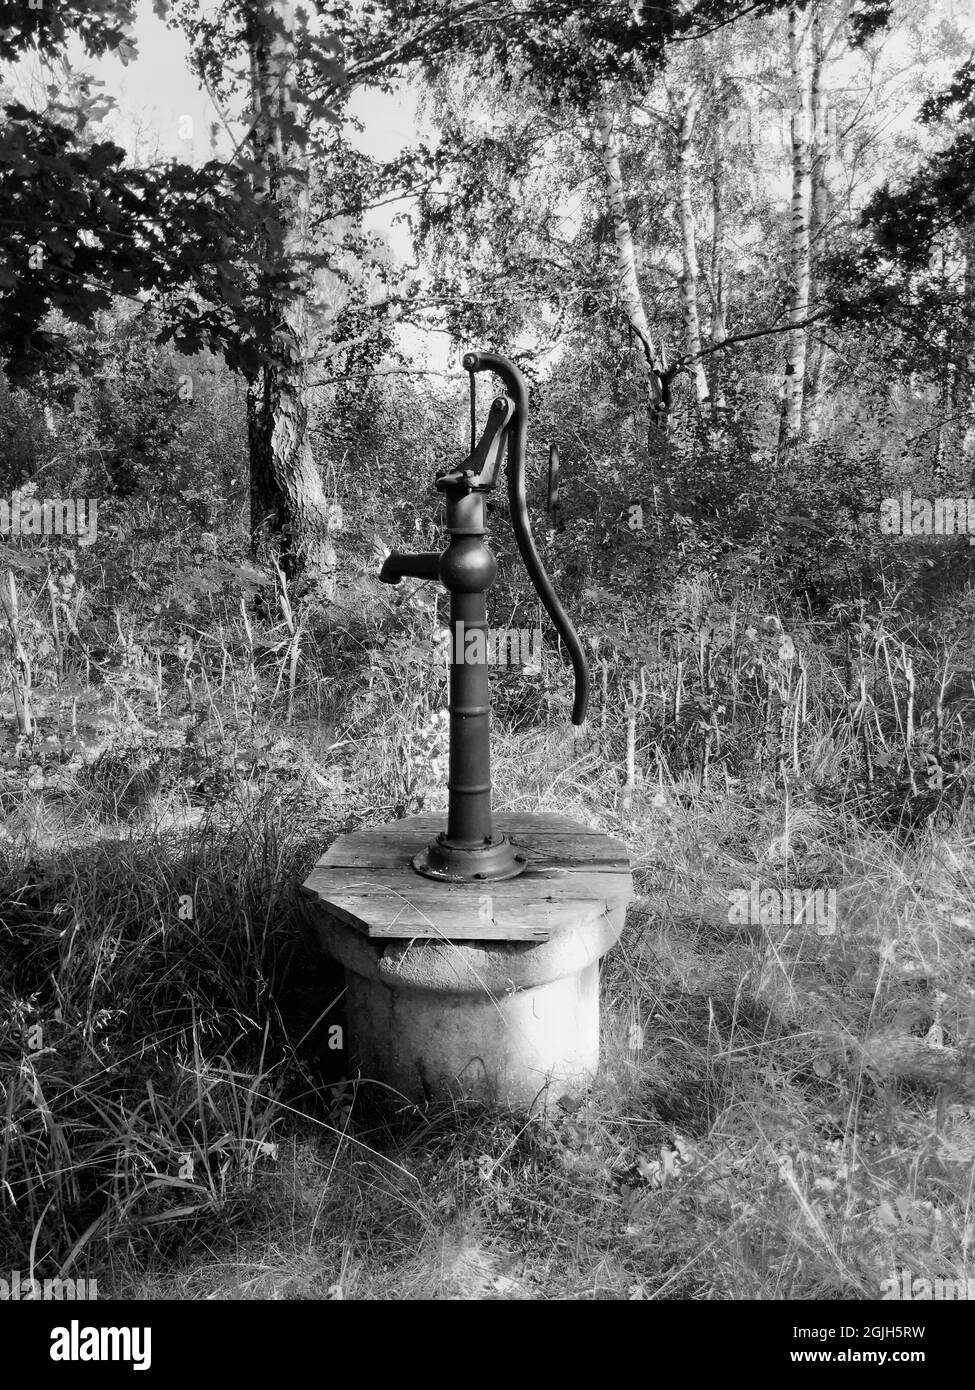 https://c8.alamy.com/comp/2GJH5RW/an-old-fashioned-hand-powered-water-pump-in-a-garden-in-black-and-white-2GJH5RW.jpg